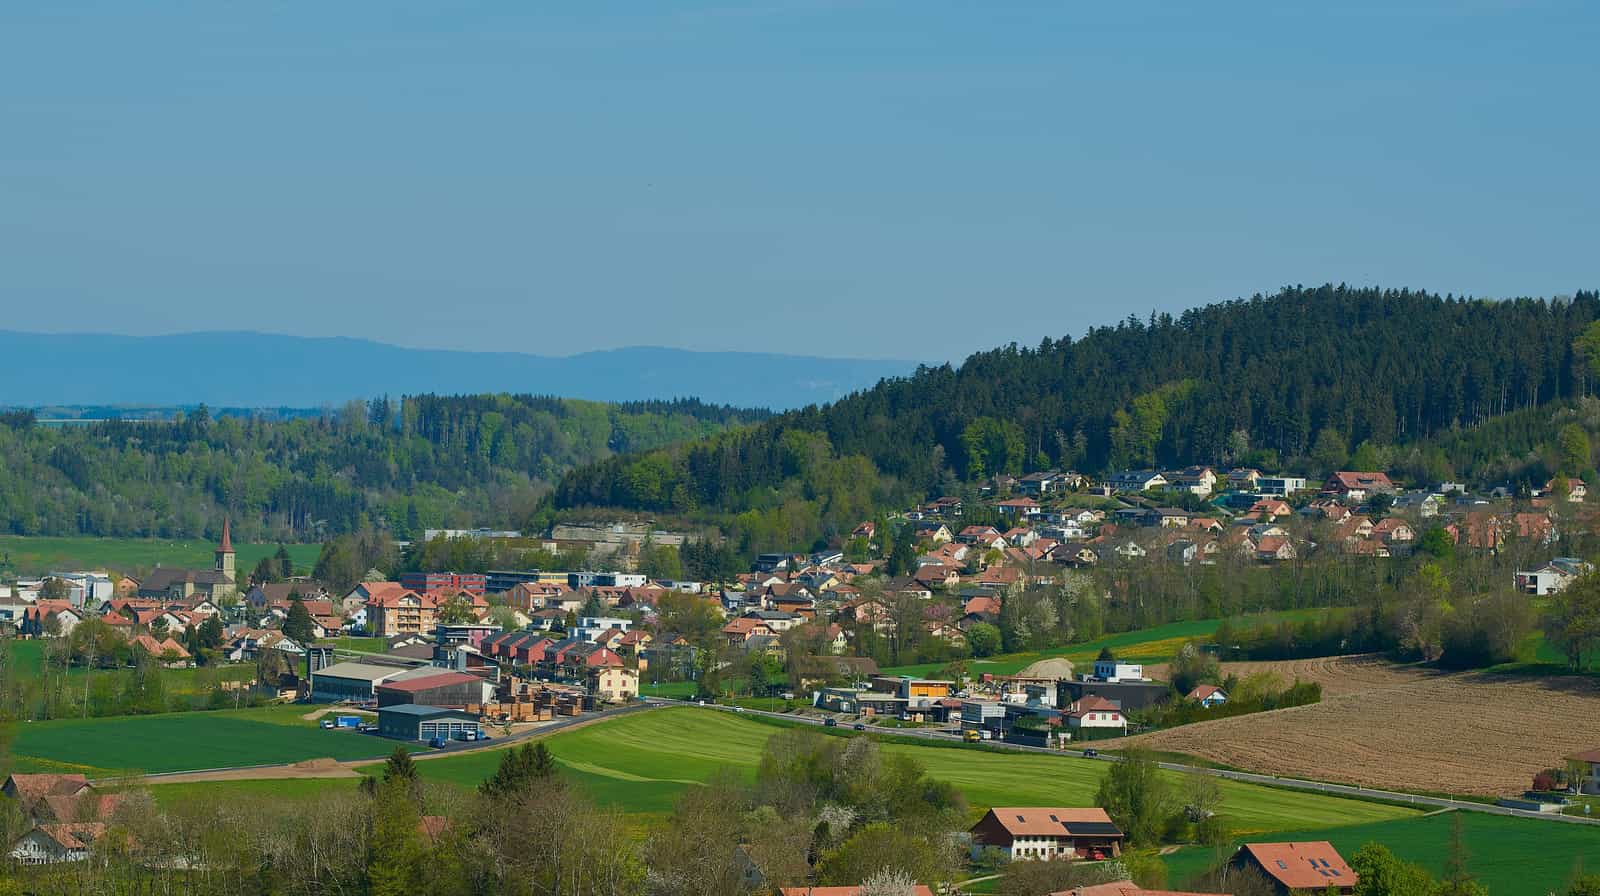 The village of Ursy in the canton of Fribourg. district of Glâne